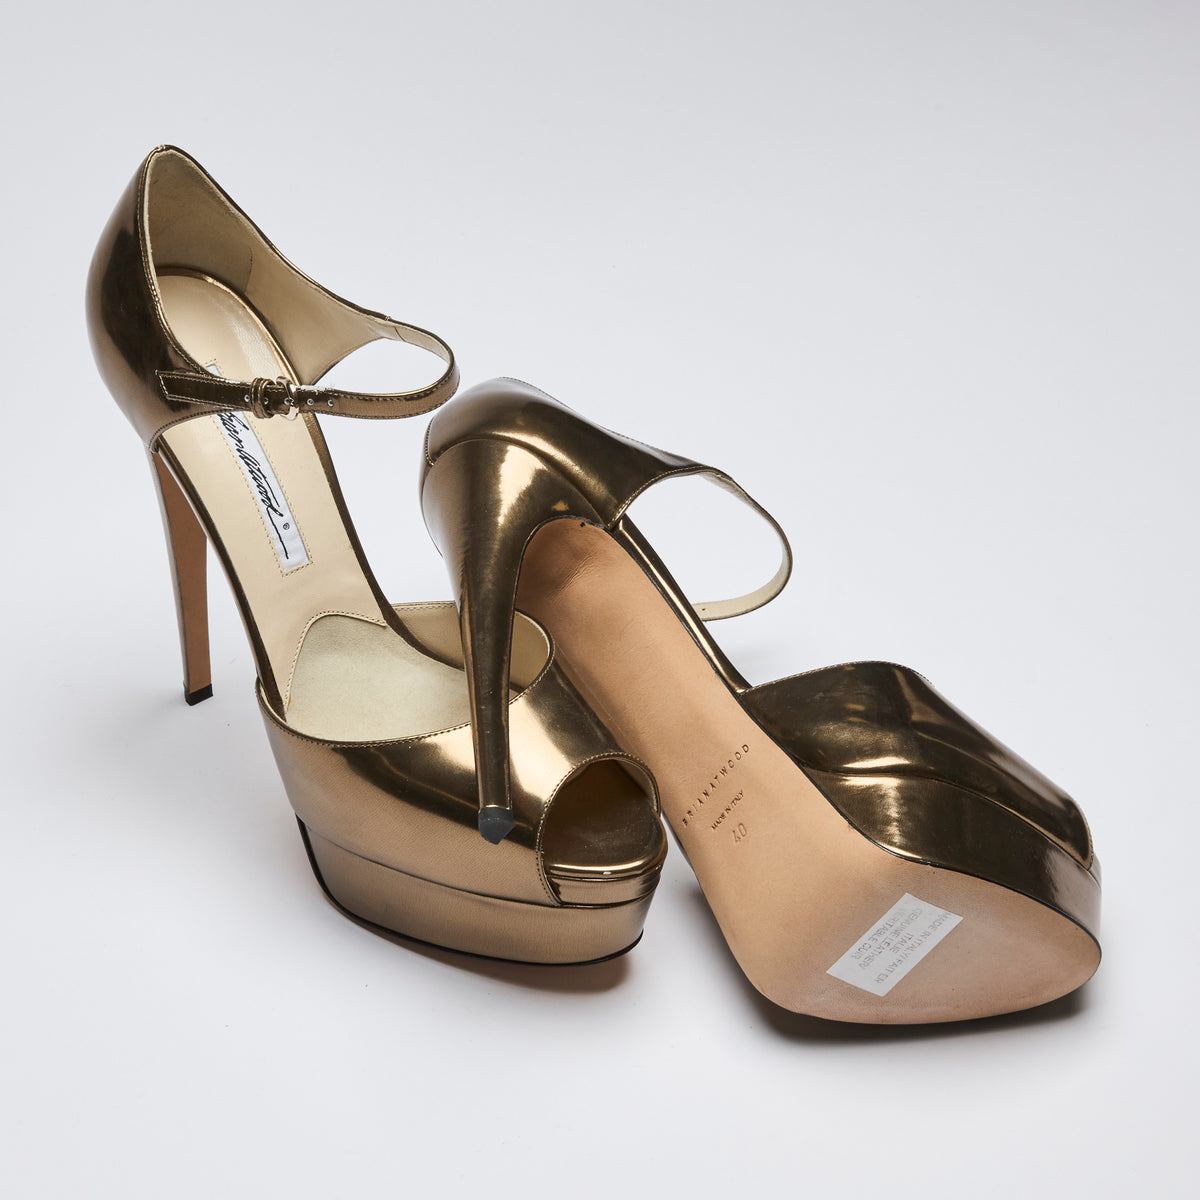 Excellent Pre-Loved Gold Metallic Leather Platform Peep Toe Pumps with Ankle Strap.(bottom)